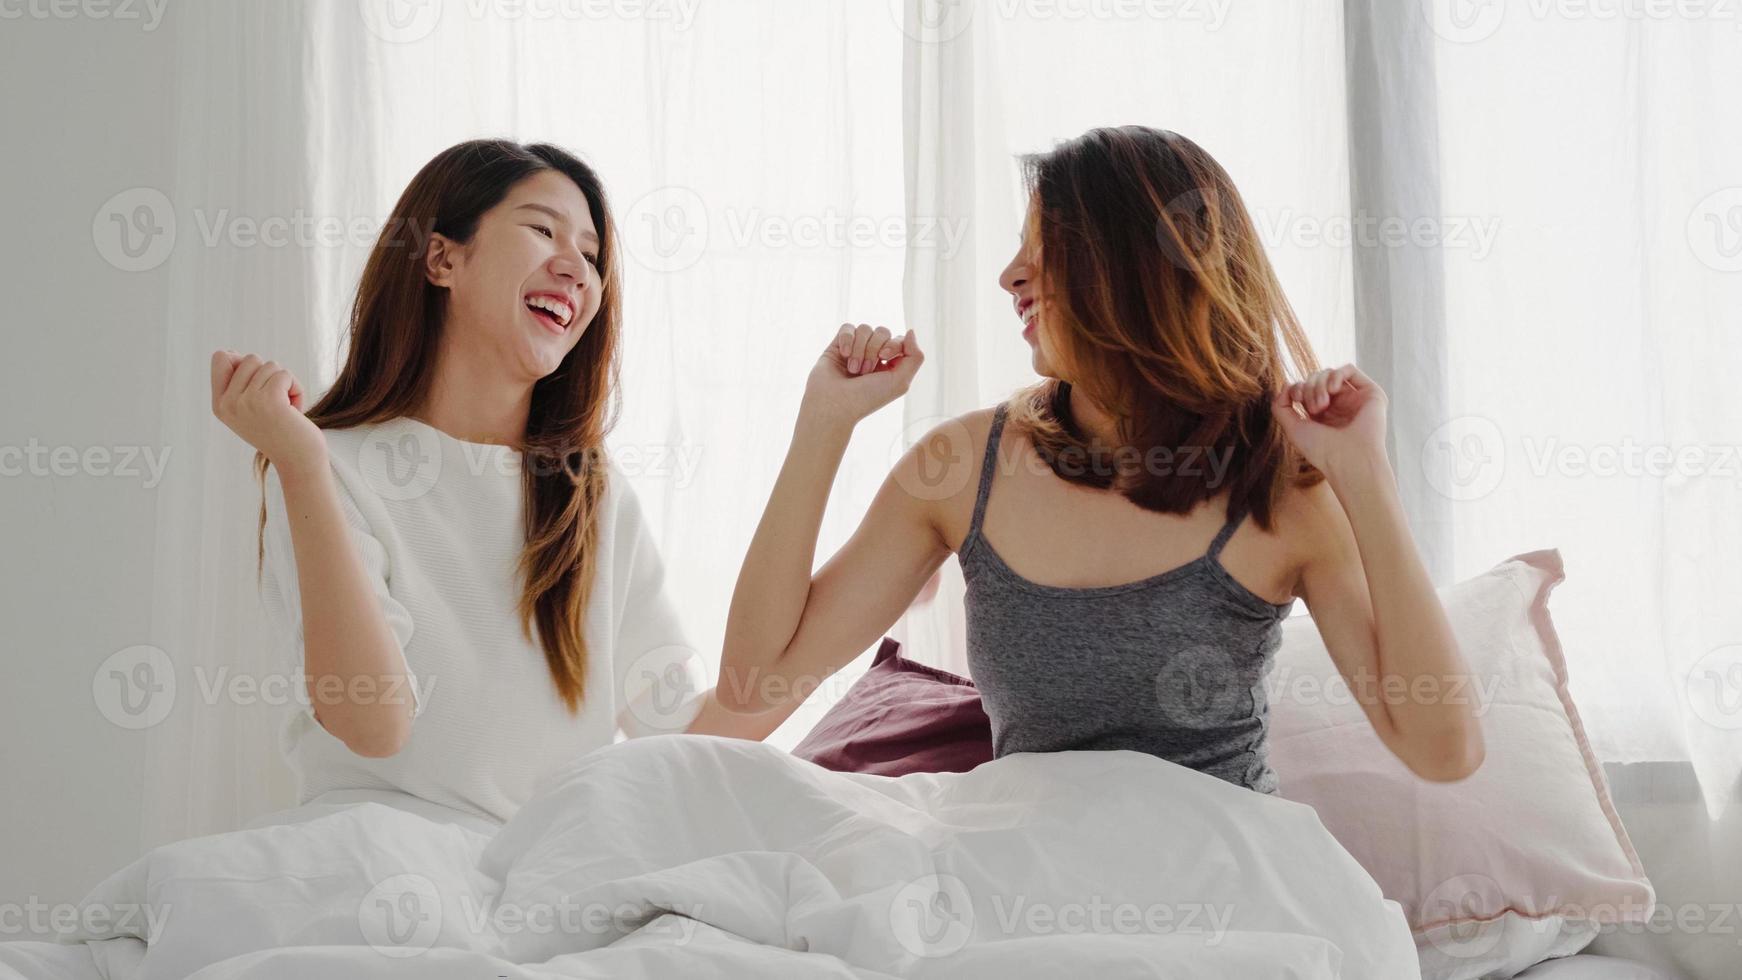 Beautiful young asian women LGBT lesbian happy couple or Girls Friends dancing to streaming music having wild fun in pajamas on bed in teenage bedroom hanging out at home. Spending nice time at home. photo